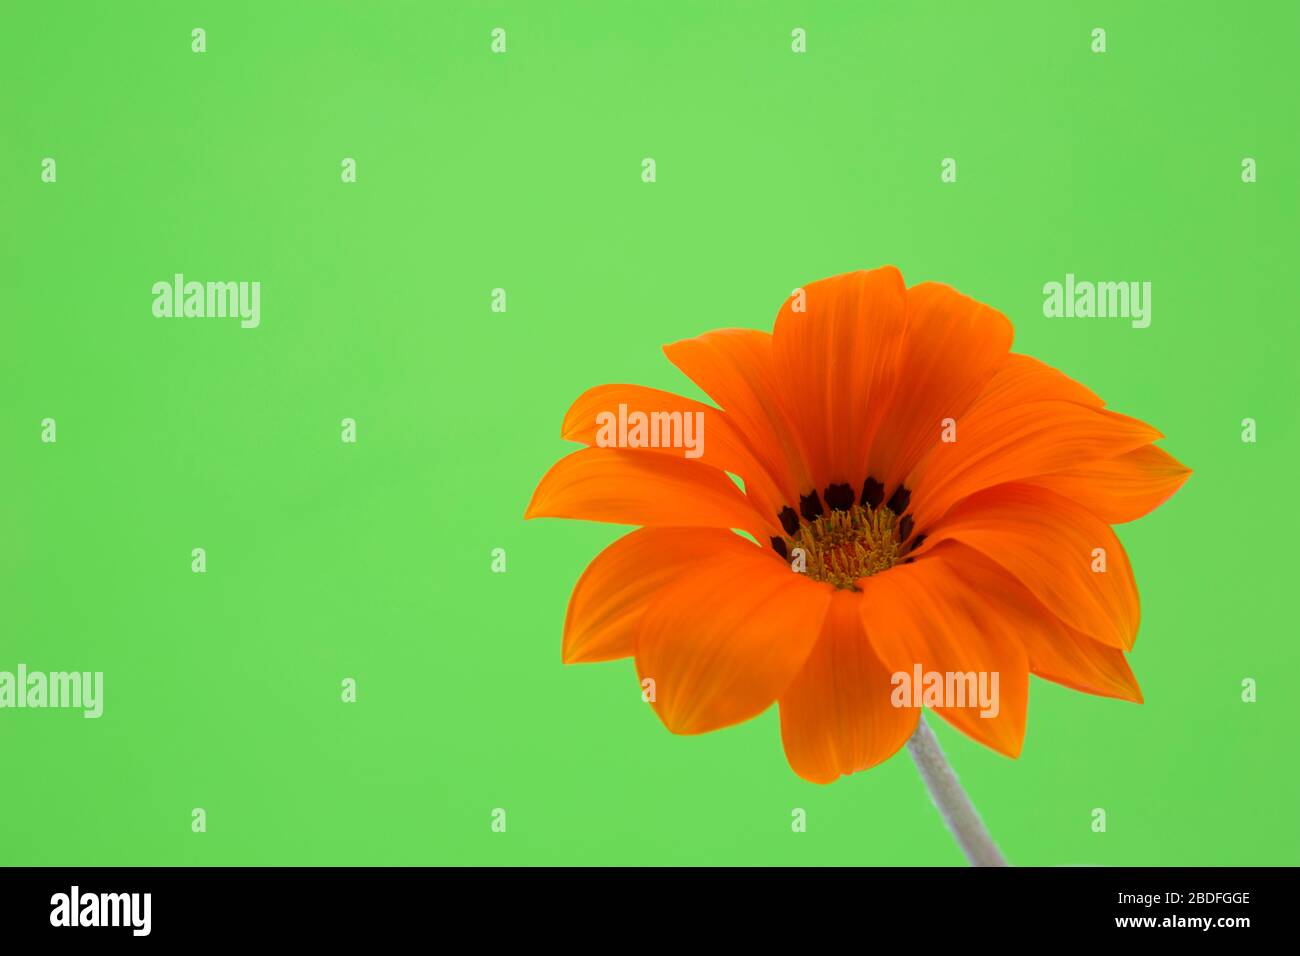 Spring and freshness concept image of orange daisy with bright green background Stock Photo